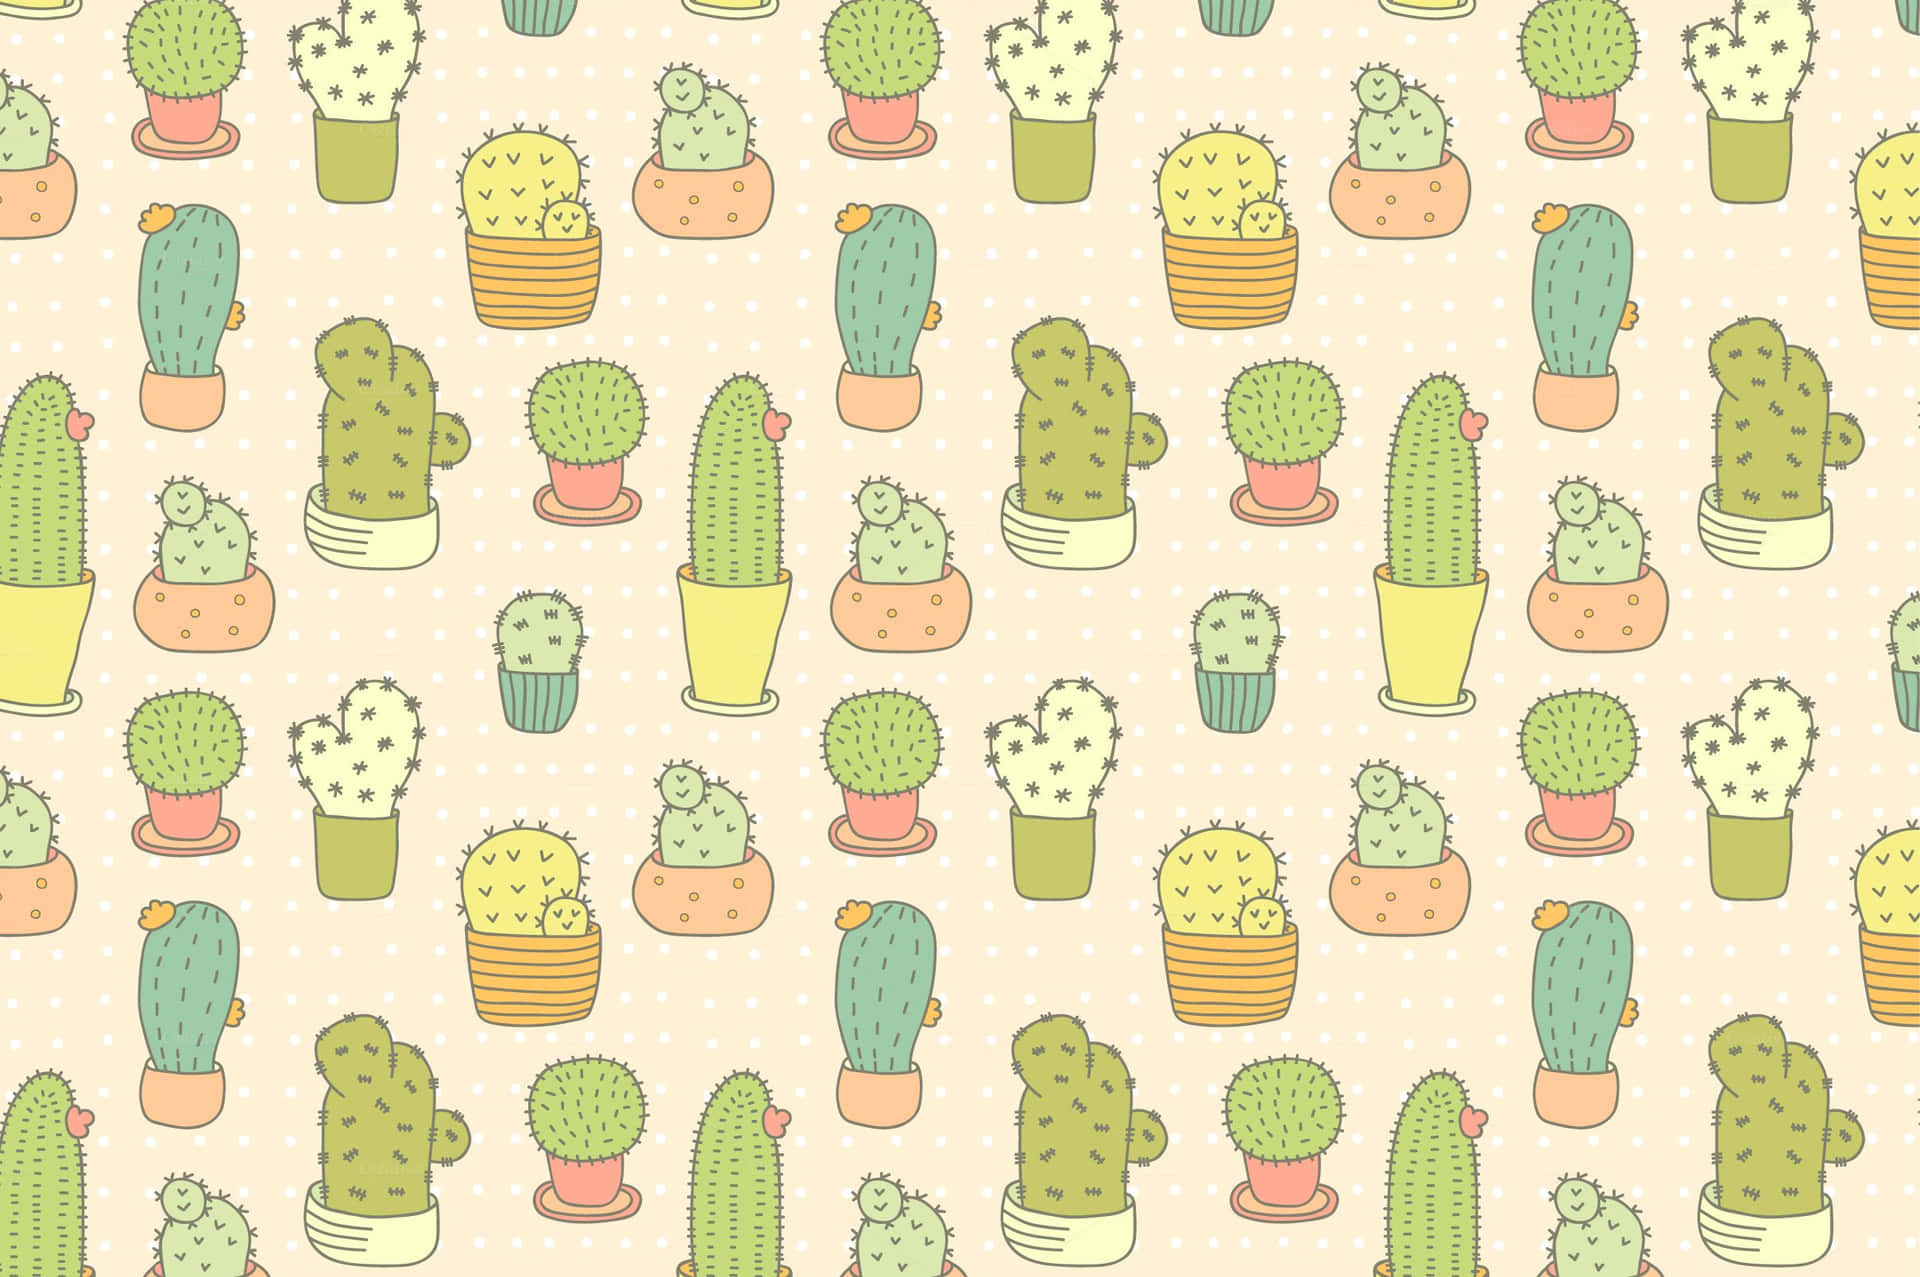 A cute and lovely little cactus in its natural environment, perfect for brightening up any room. Wallpaper